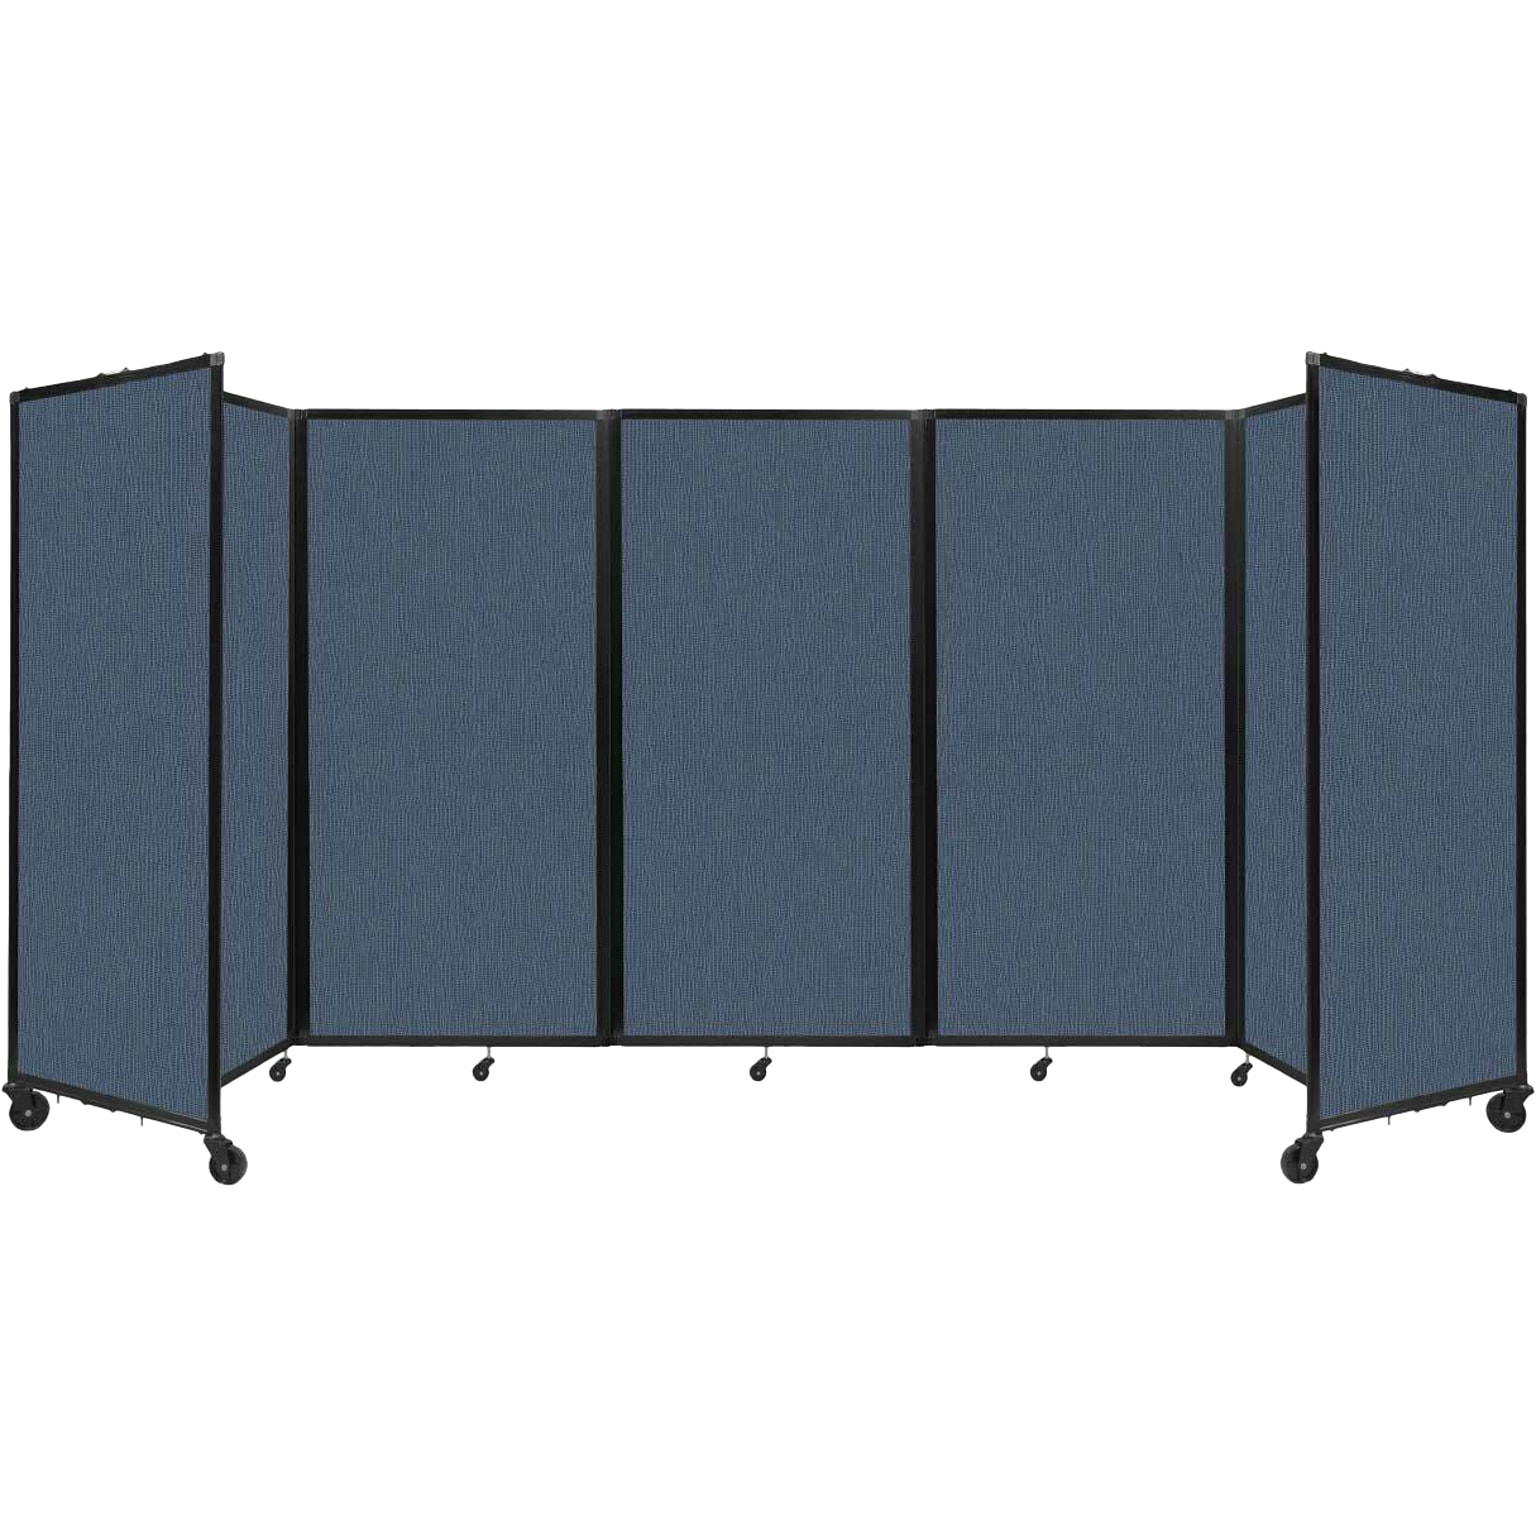 Versare The Room Divider 360 Freestanding Mobile Partition, 72H x 168W, Ocean Fabric (1172515)